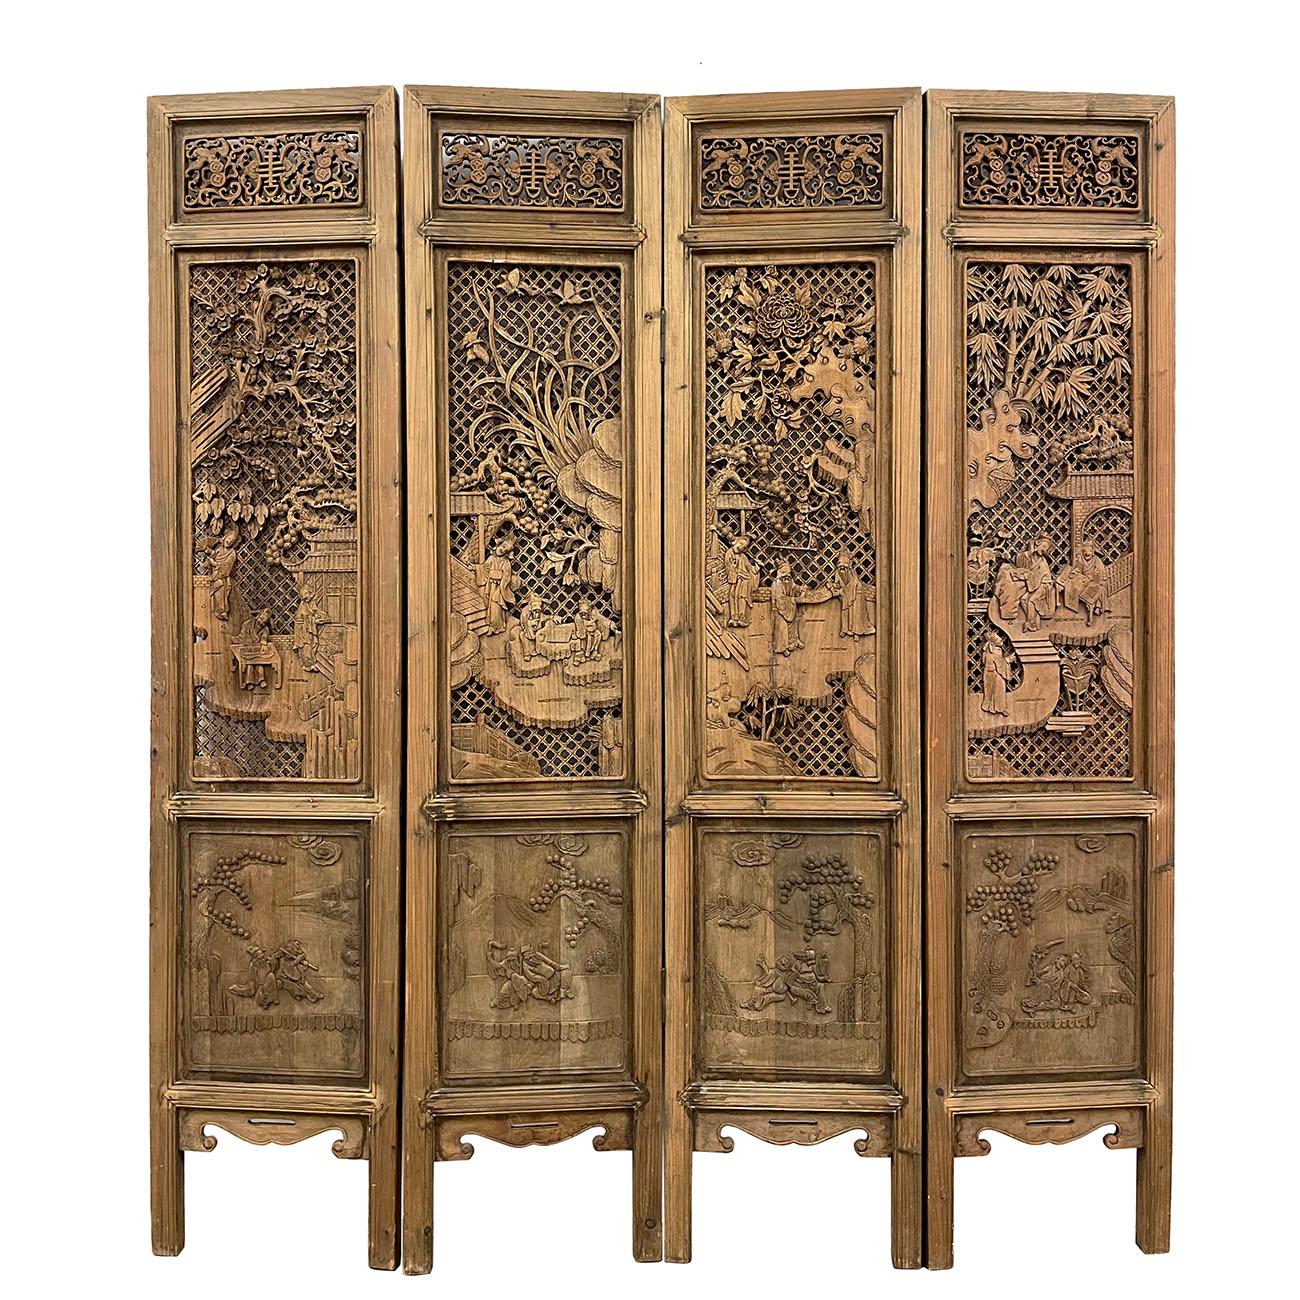 This is a set of 4 Panels Chinese antique open carved wooden panels which used to be the interior divider/door panels in ancient China that are put together to make into a screen. Screens have been known to grace the rooms of wealthy Chinese homes